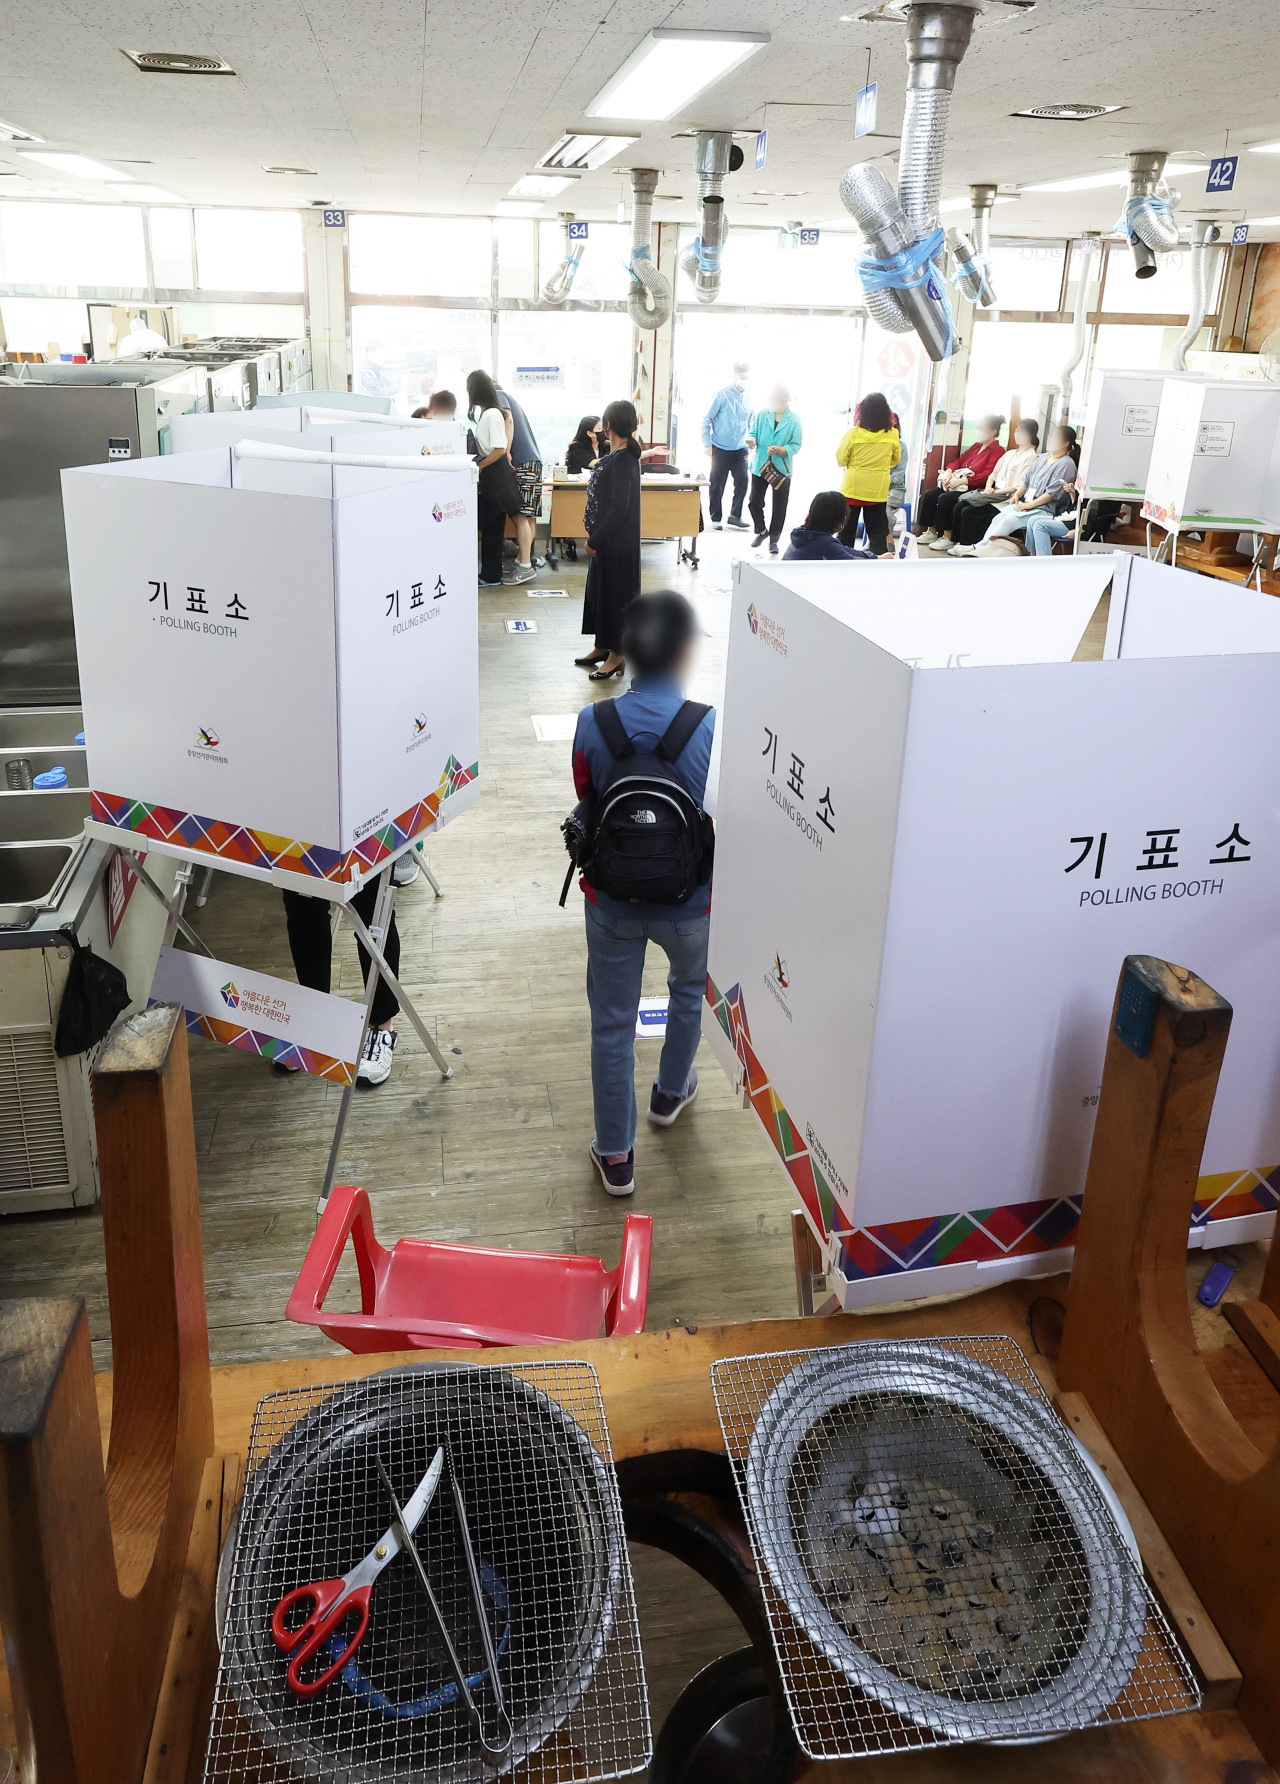 Barbeque grills are seen inside a polling booth set up at a restaurant in Gwangmyeong, Gyeonggi Province, for Wednesday’s local elections. (Yonhap)